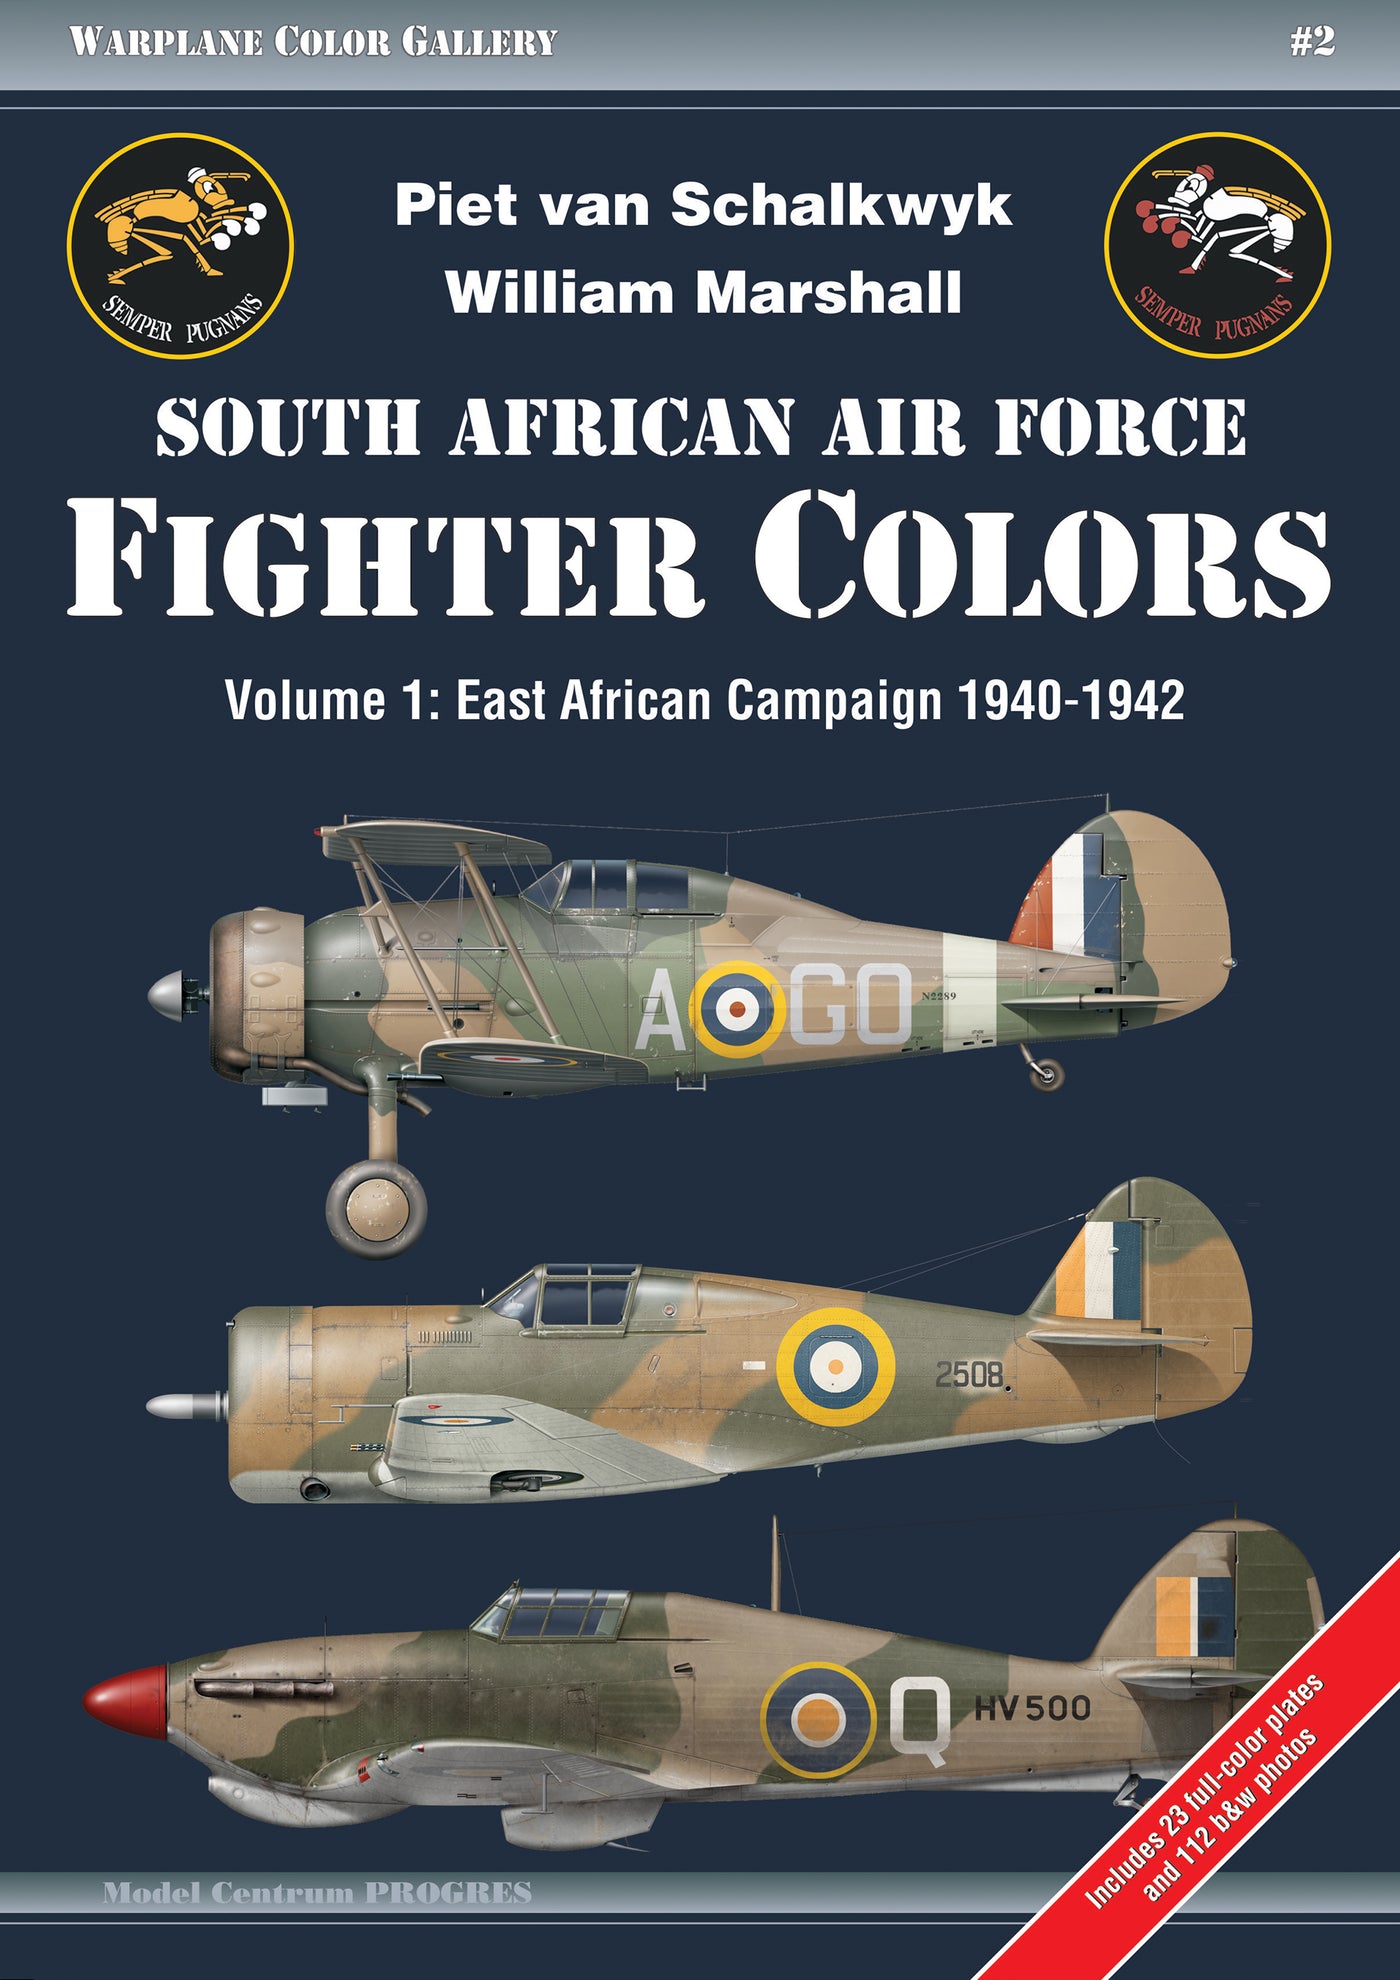 South African Air Force Fighter Colors. Volume 1